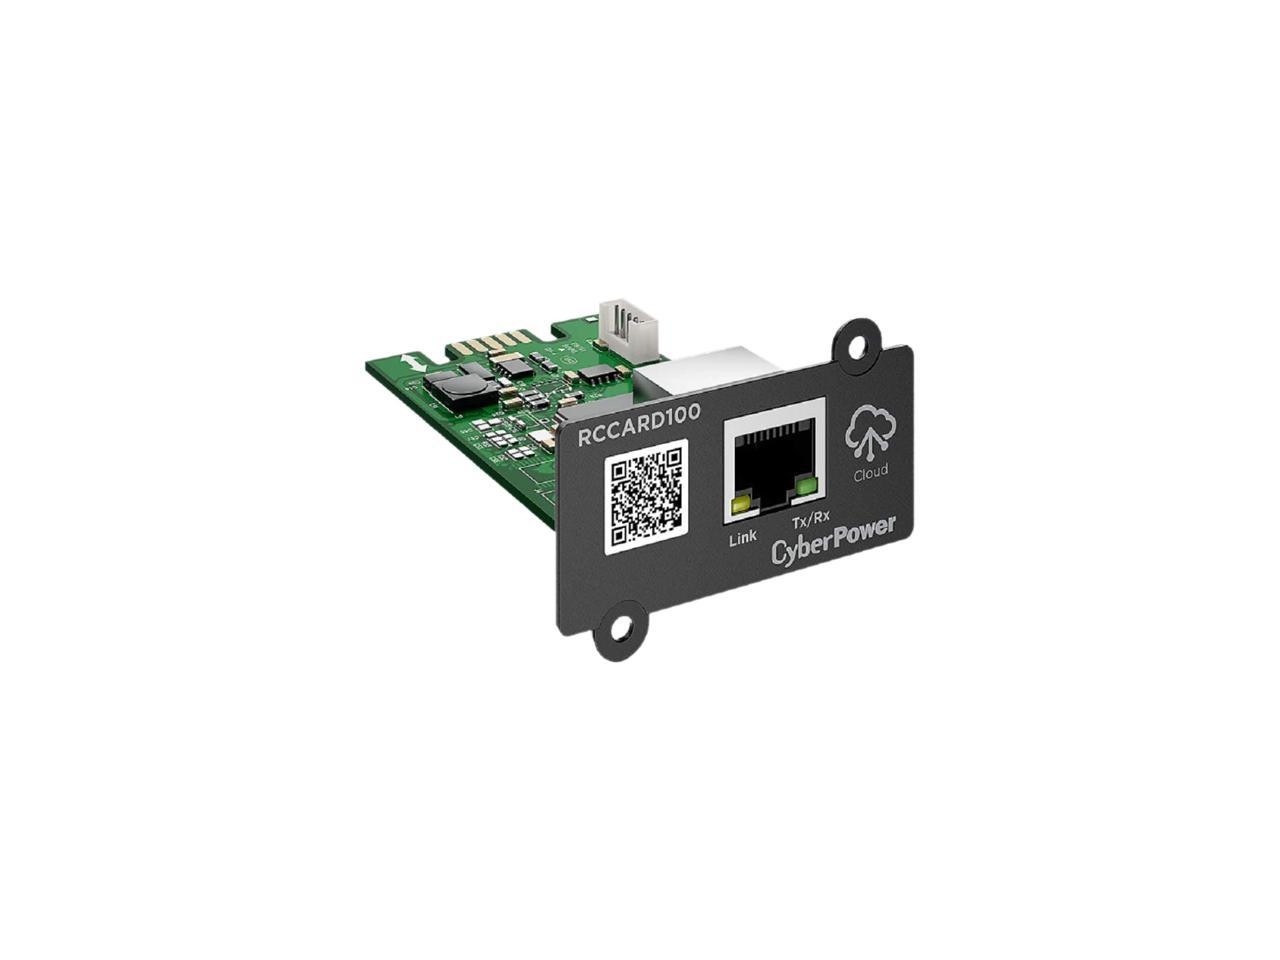 Cyberpower Cloud Monitoring Card RCCARD100